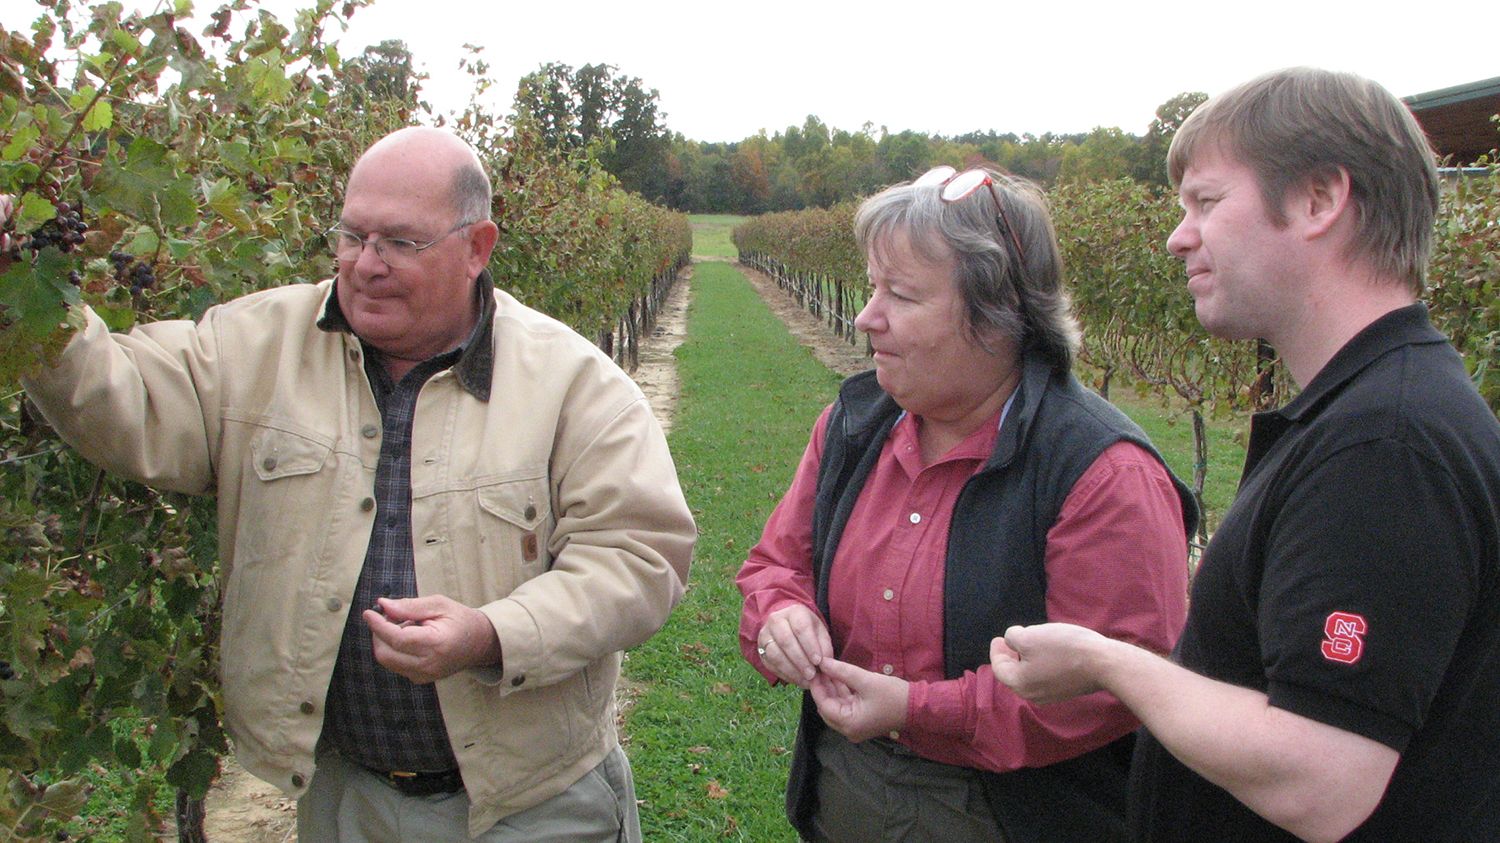 Two men and a woman examining grapes in a vineyard.